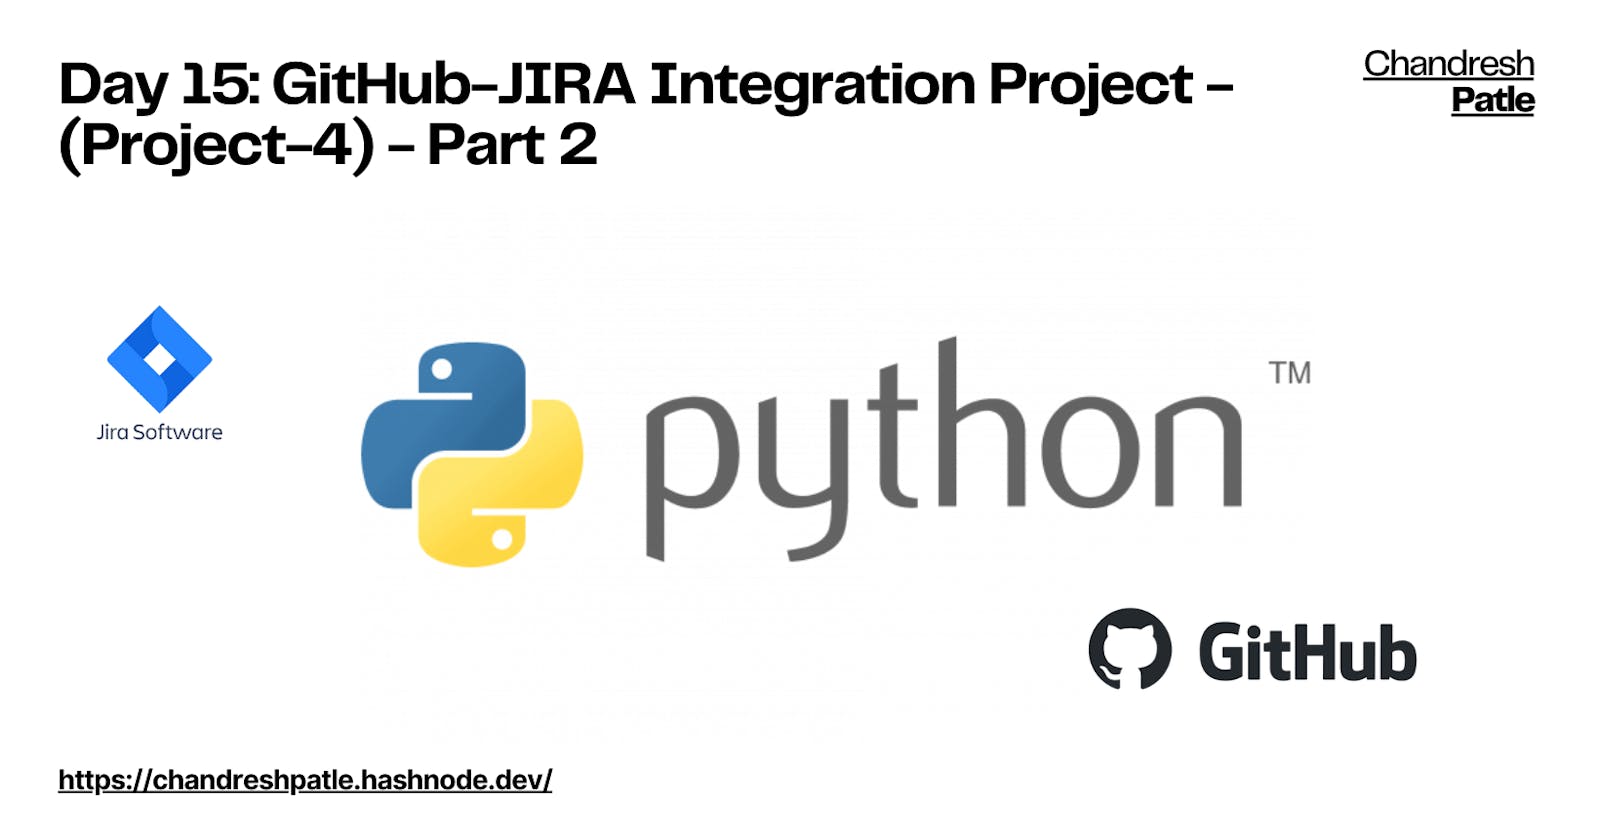 Day 15: GitHub-JIRA Integration Project - (Project-4) - (Part 2)